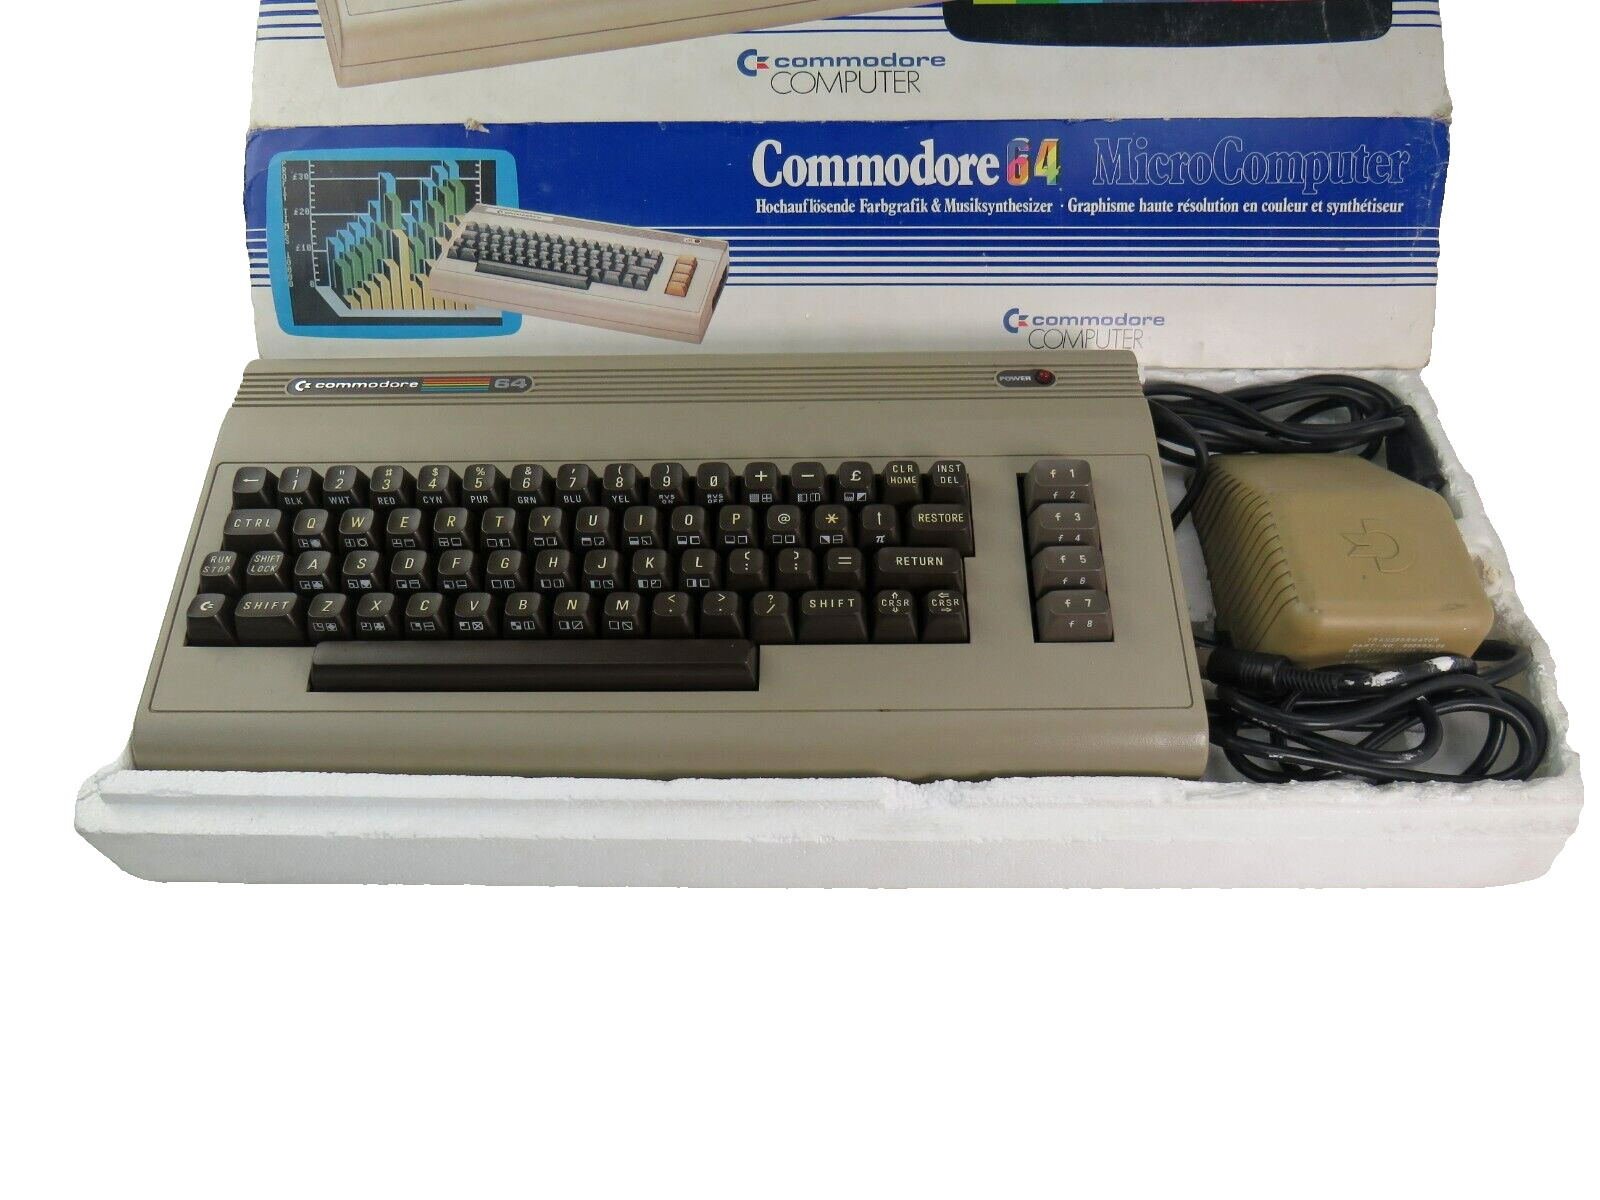 Commodore C 64 C64 with power supply and box